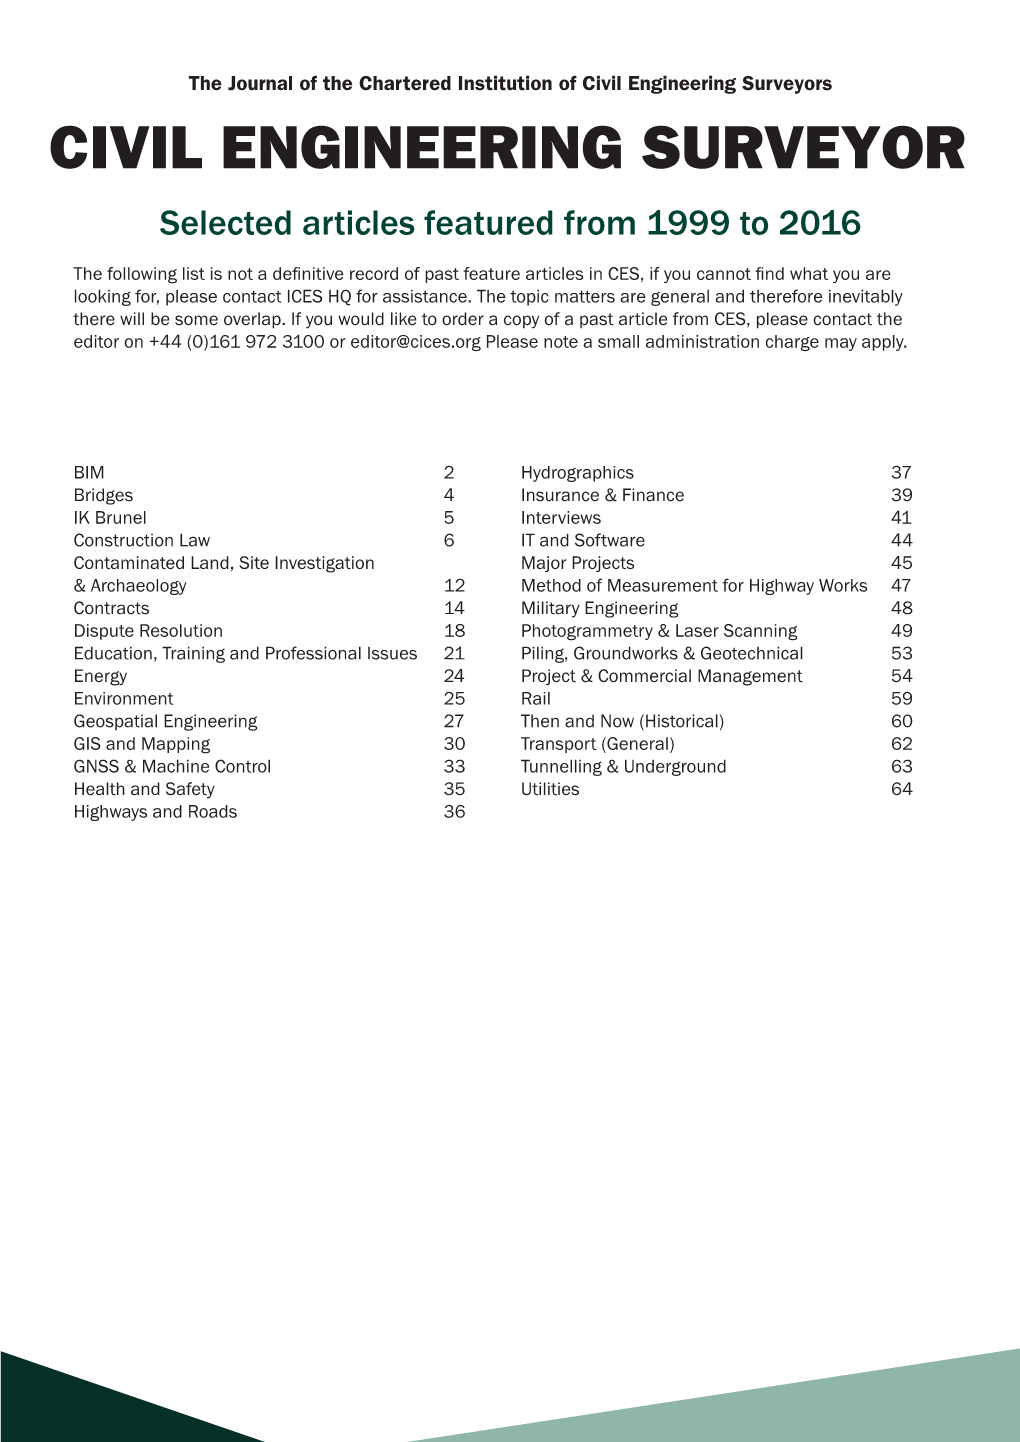 Civil Engineering Surveyors CIVIL ENGINEERING SURVEYOR Selected Articles Featured from 1999 to 2016